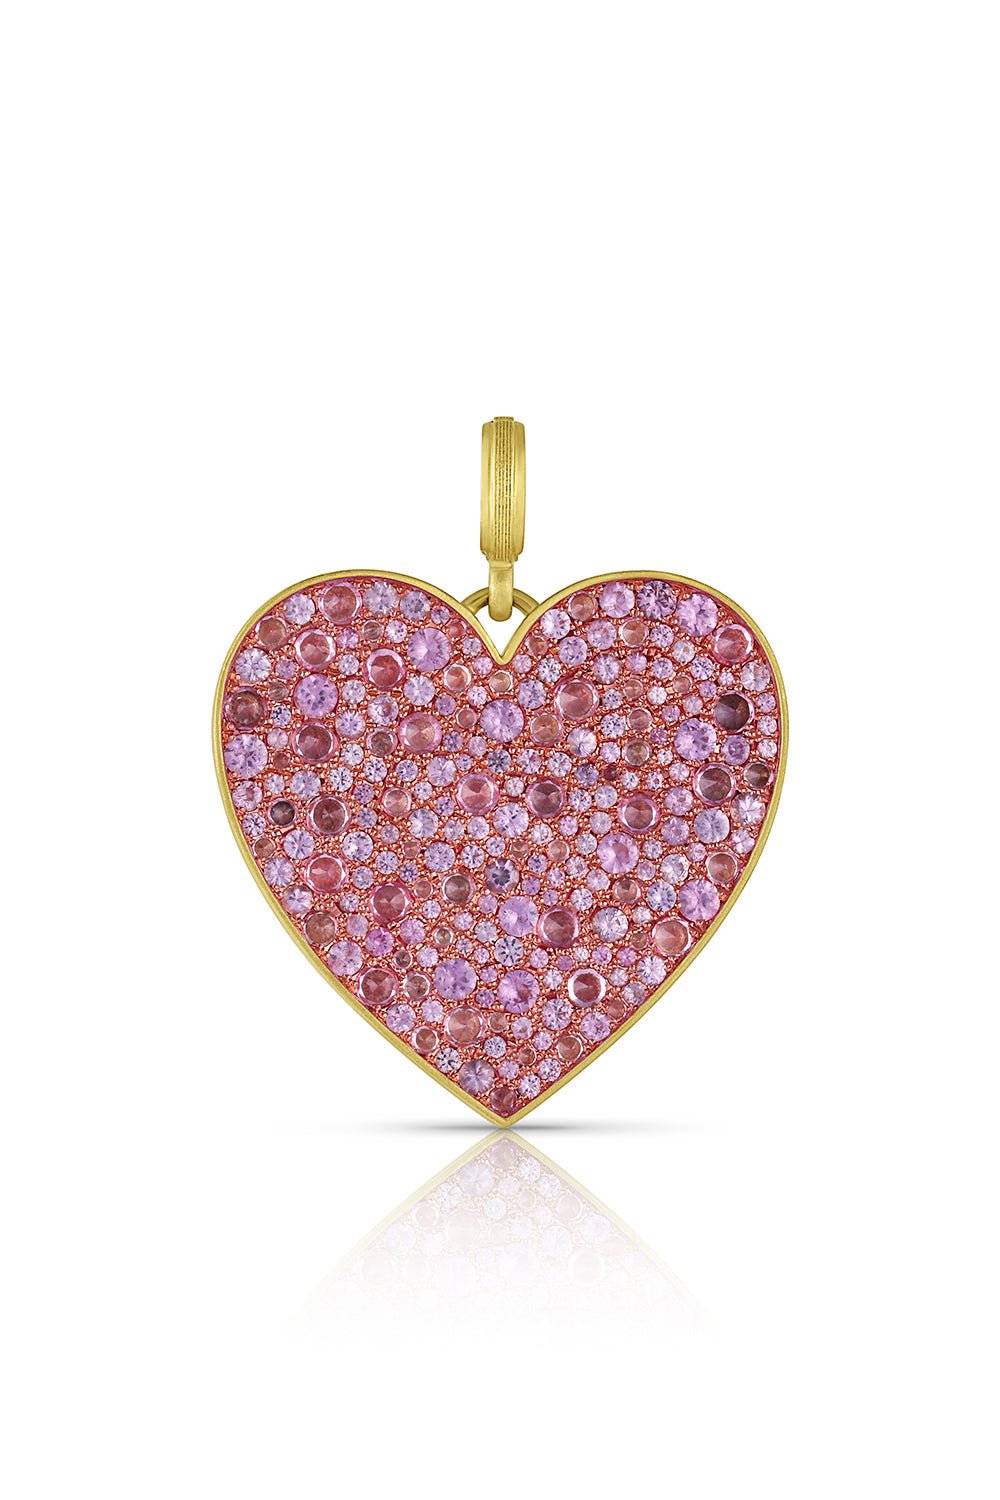 LEIGH MAXWELL-Large Pink Sapphire Heart Pendant-YELLOW GOLD